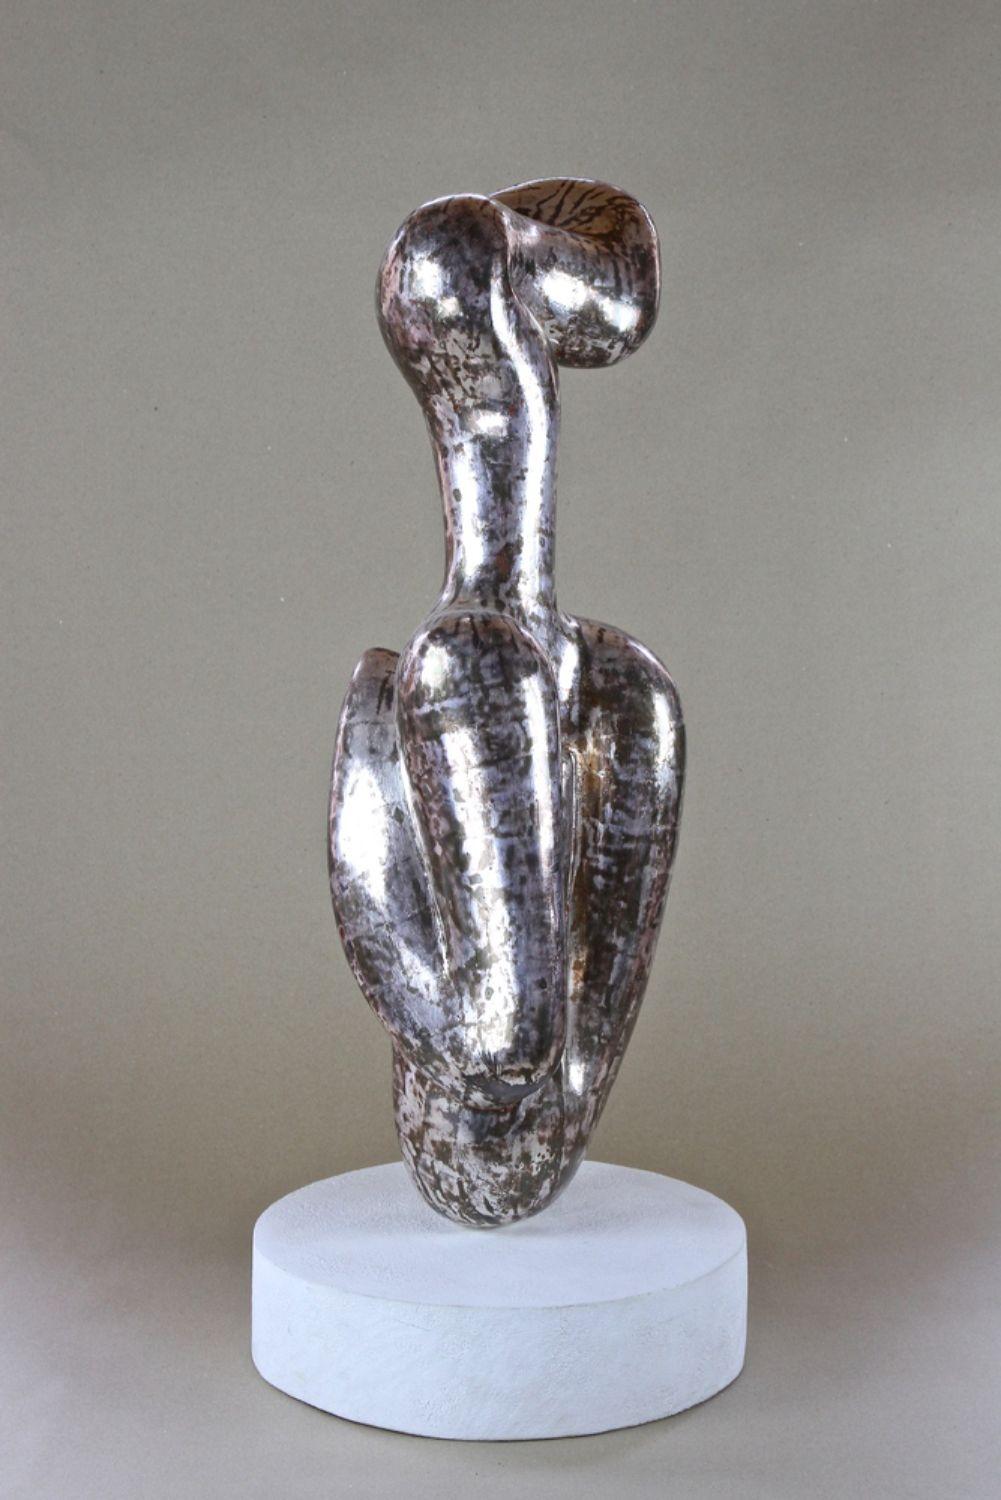 Silver Leaf Abstract Contemporary Silvered Sculpture by M. Treml, Handcarved, Austria 2018 For Sale